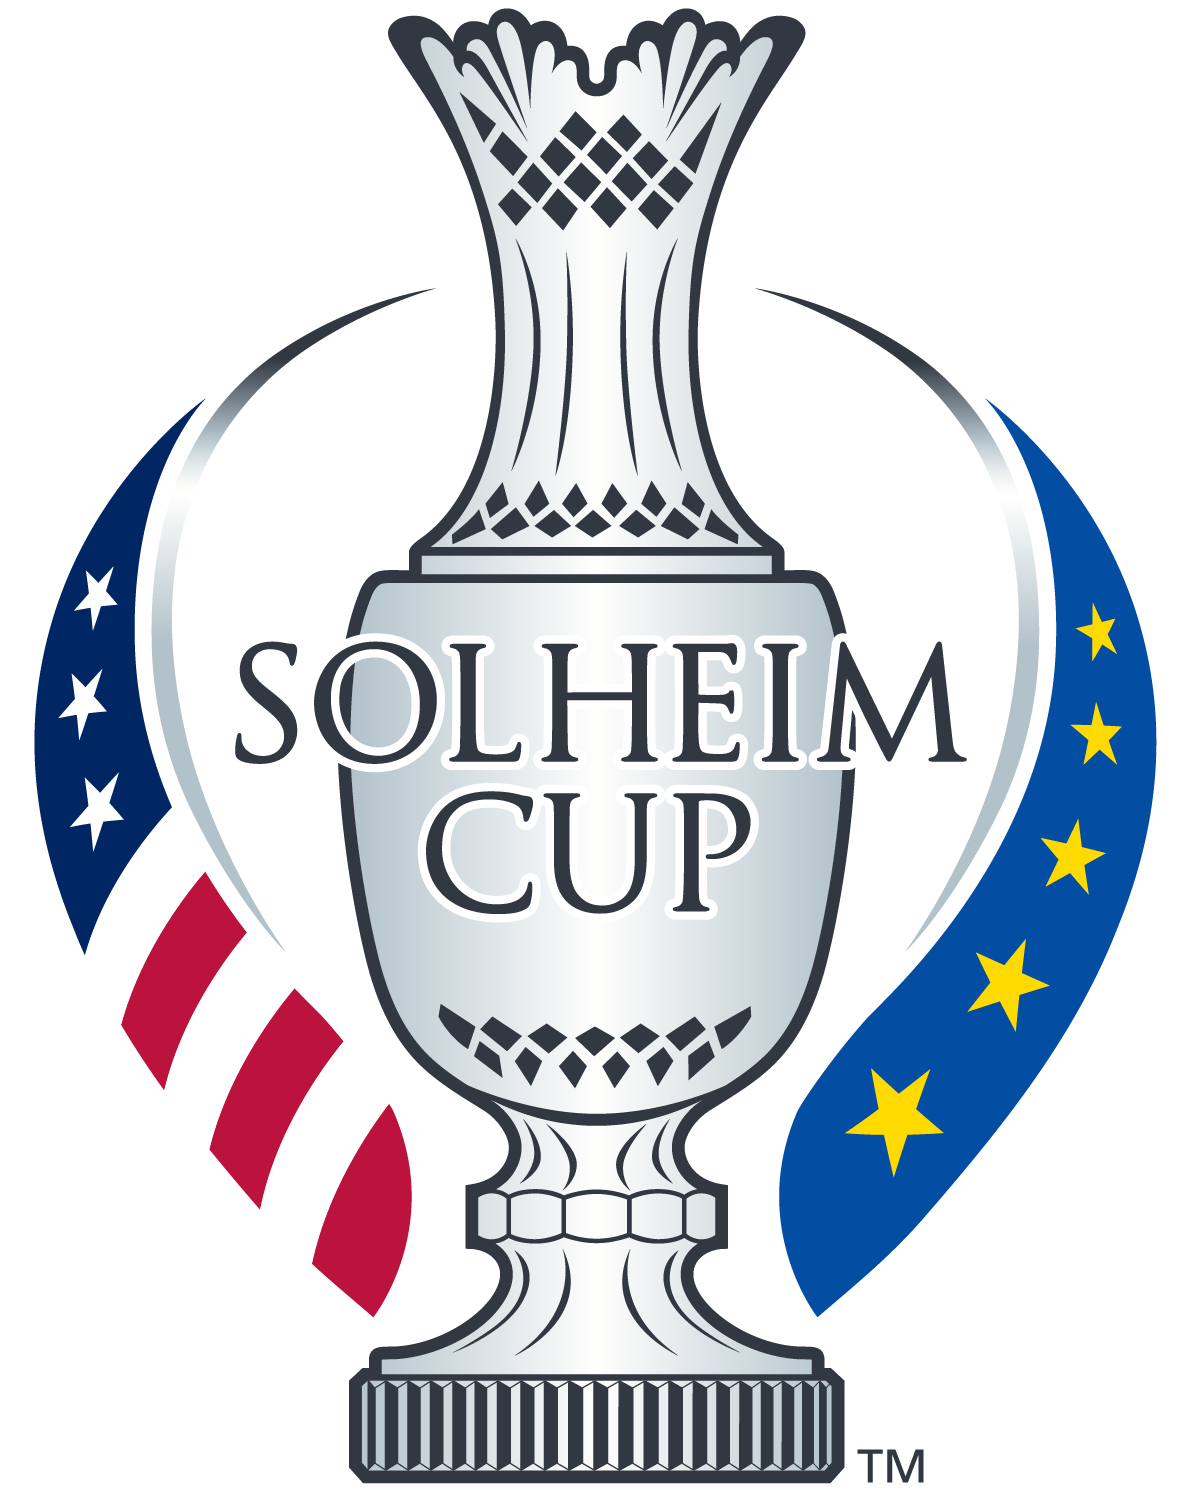 The Solheim Cup logo